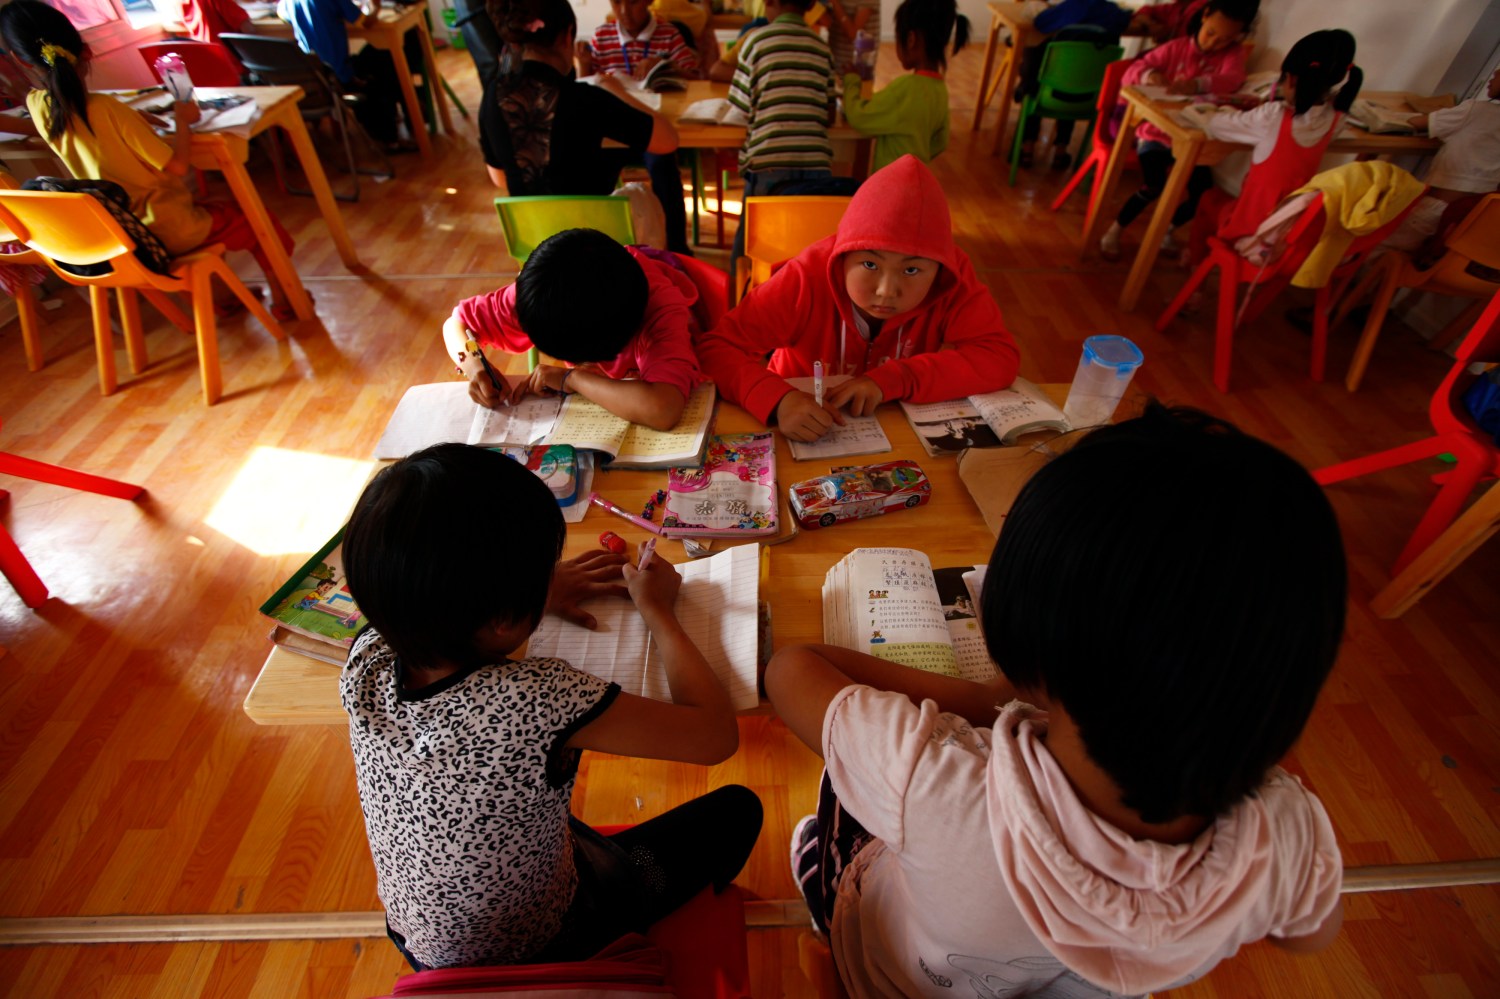 Children of migrant workers attend a class in a container used as a classroom during an after-school programme initiated by Compassion for Migrant Children (CMC) in Beijing May 25, 2011. According to their official website, CMC is a nonprofit organization founded in early 2006 to help China's urban migrant children, primarily through offering social and educational programs.    REUTERS/Petar Kujundzic (CHINA - Tags: EDUCATION)